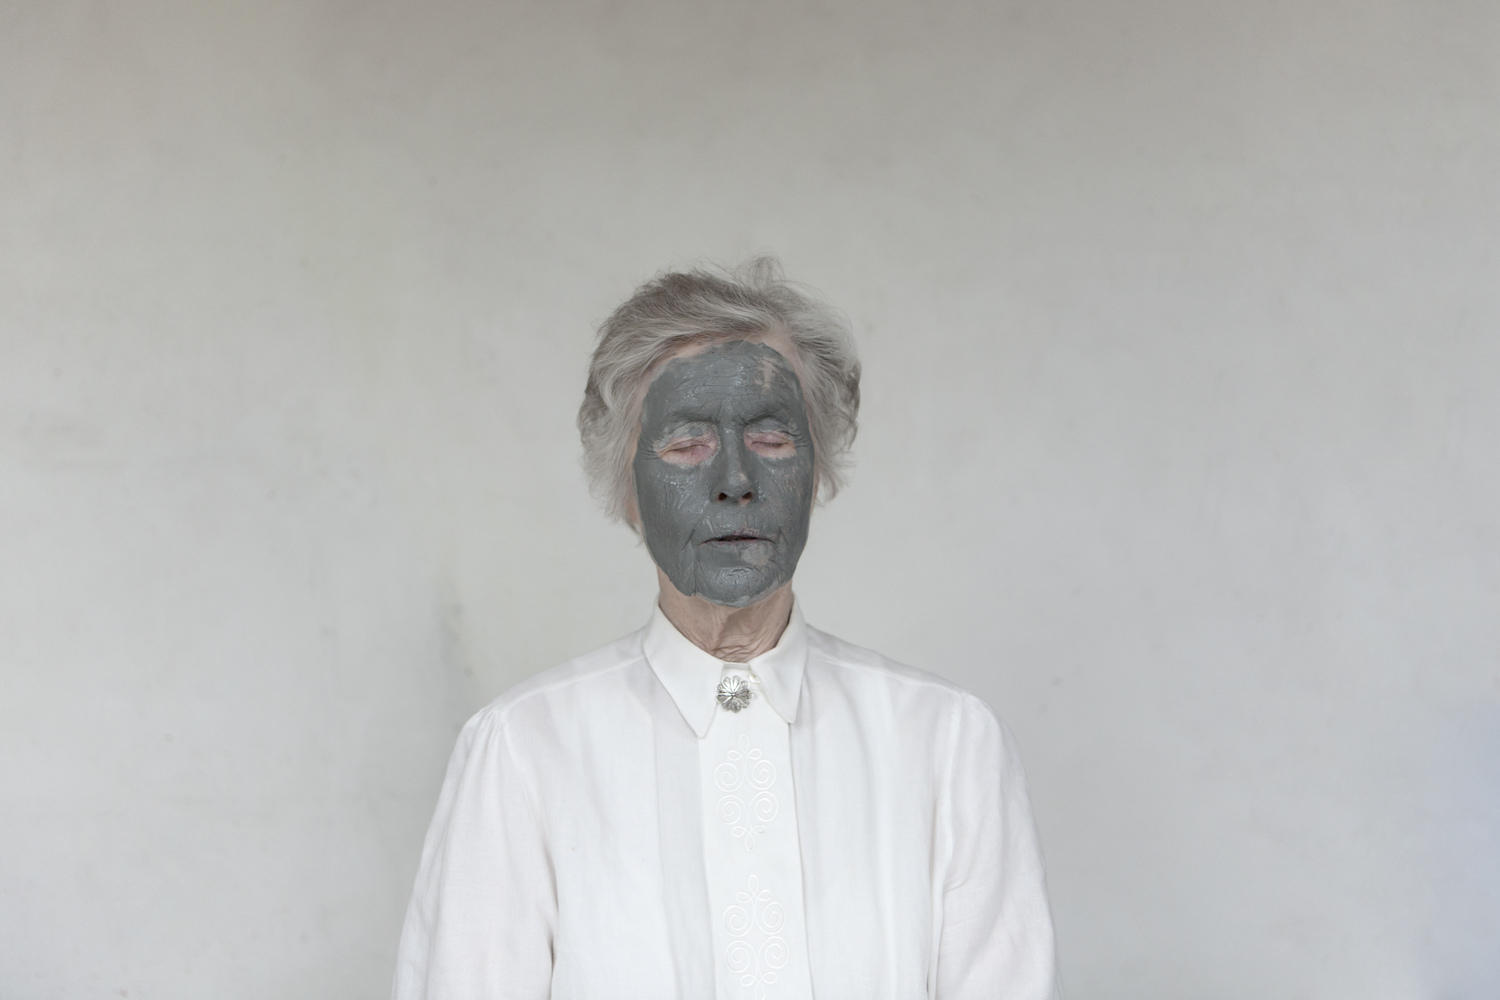 Portrait taken just after participant made her face imprint into the canvas. Iceland, 2011.